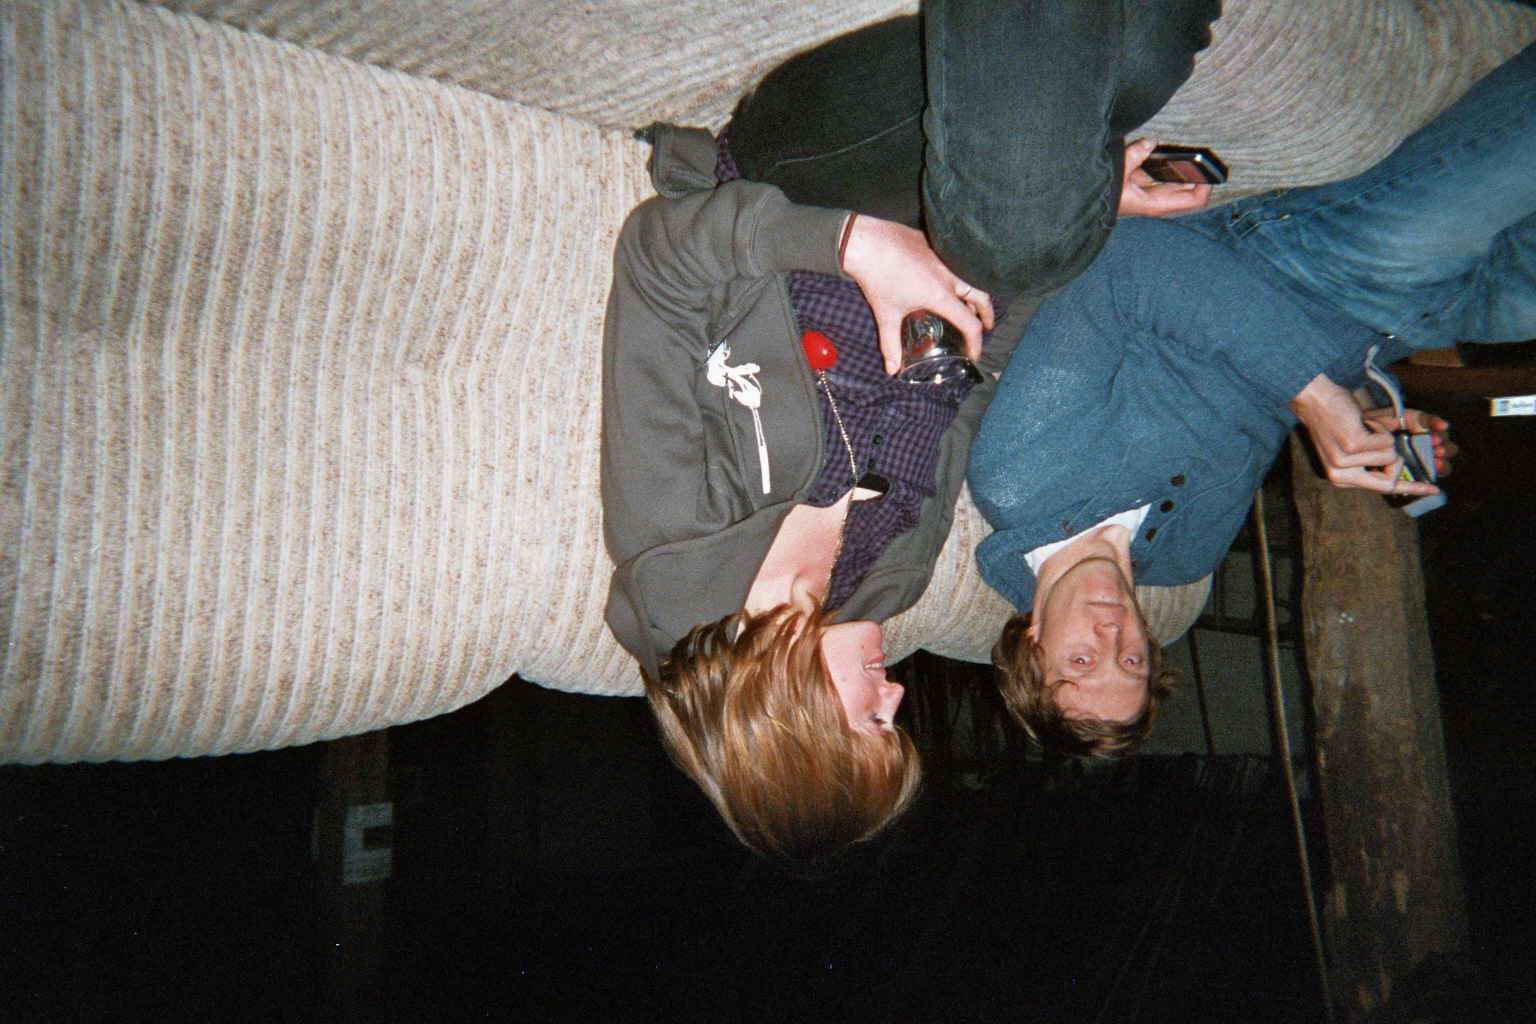 a person upside down on a bed, while a man drinks from a wine glass